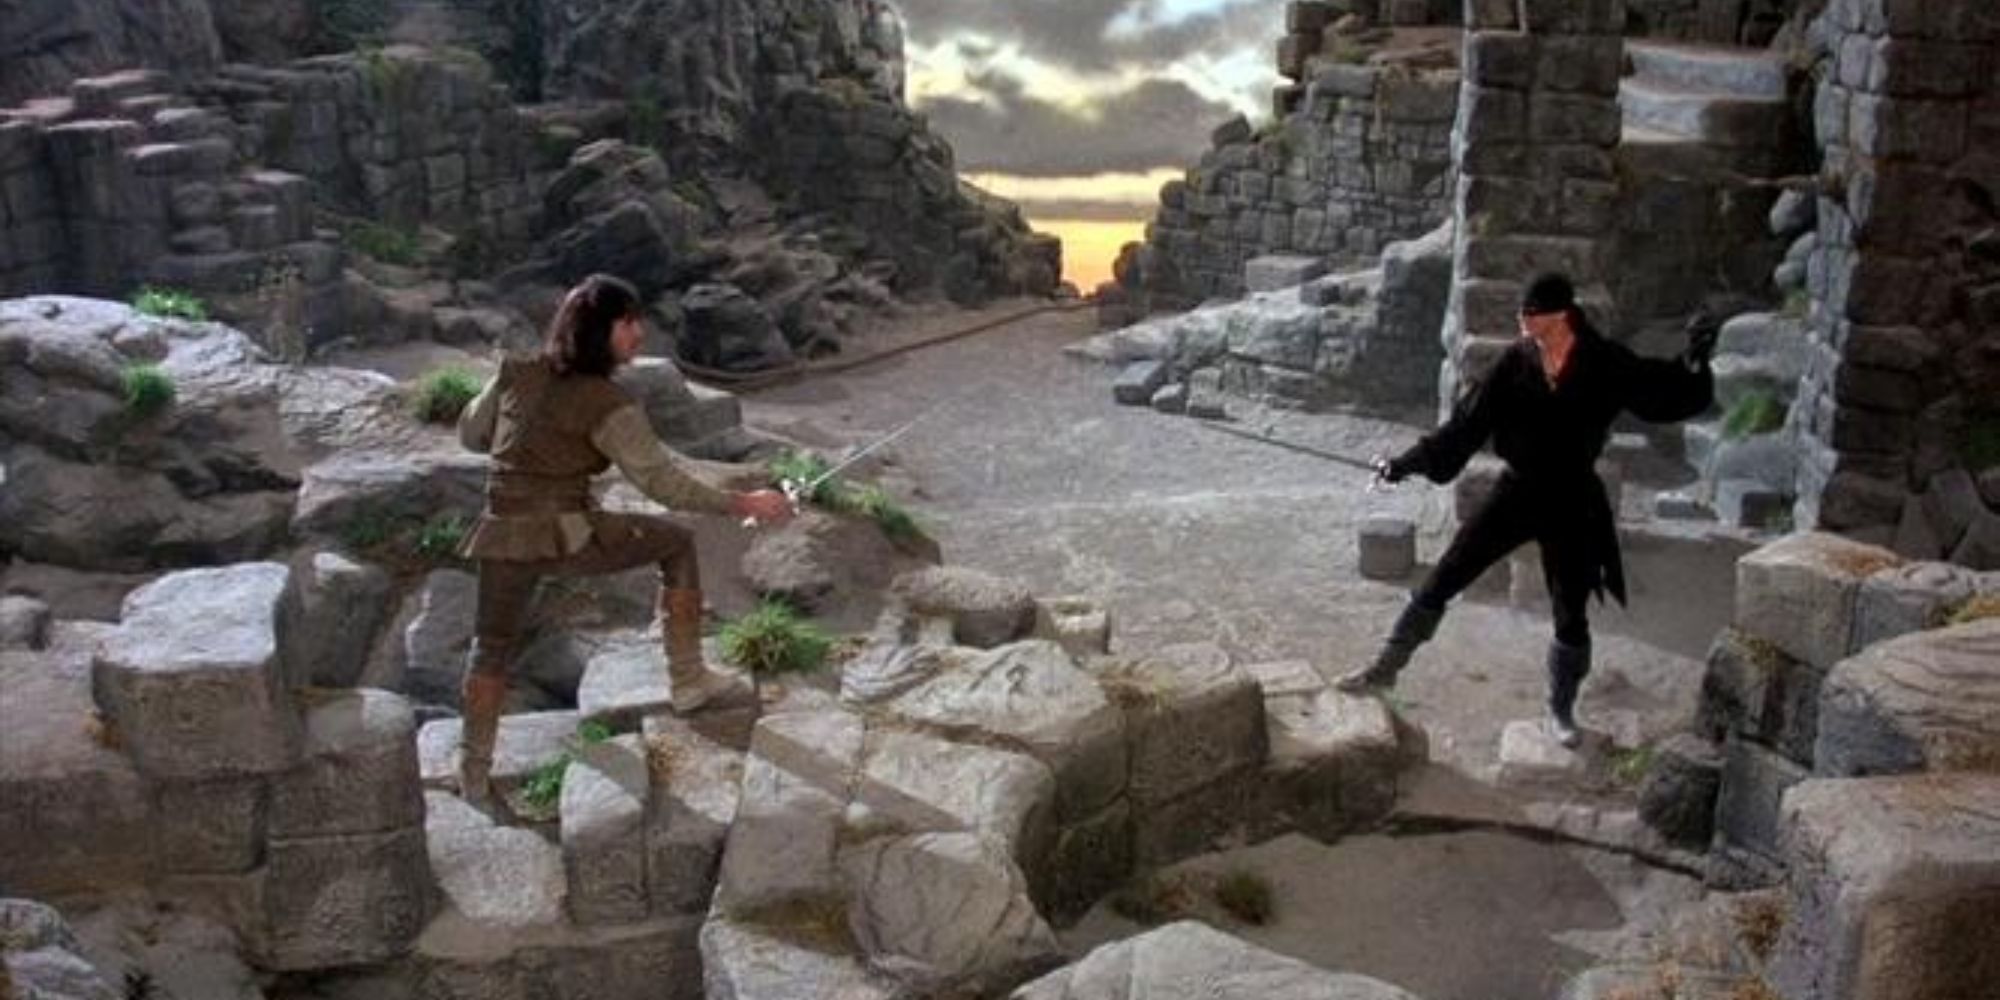 Inigo (Mandy Patinkin) and Westley (Cary Elwes) fighting in 'The Princess Bride'